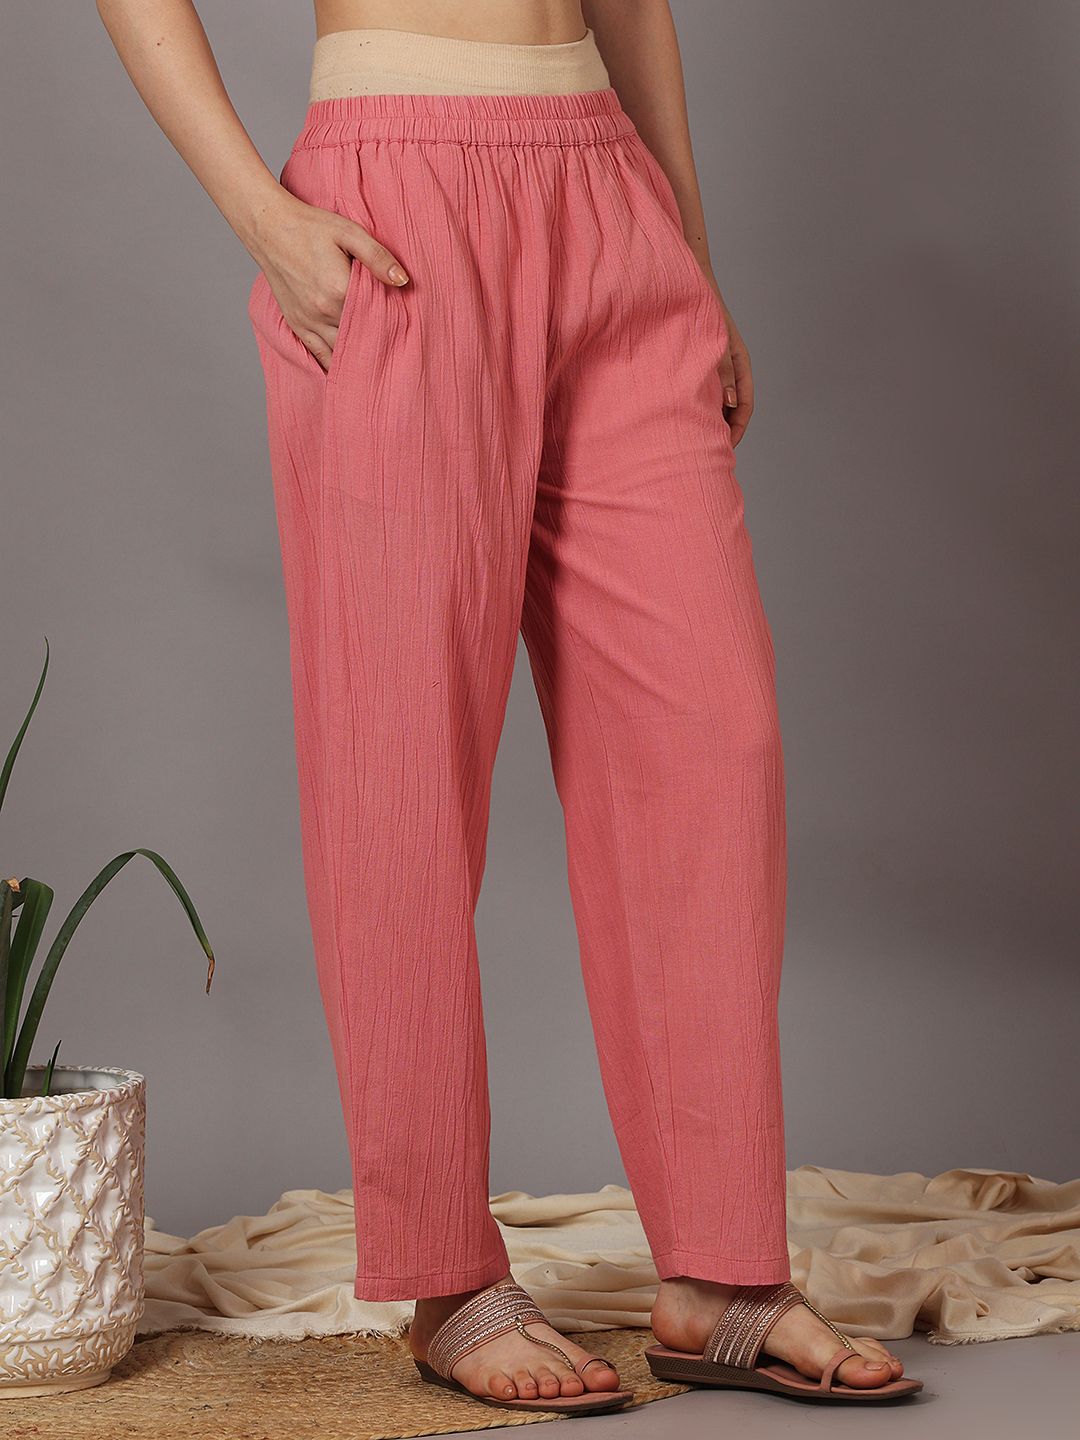 ROSE PINK  EMBROIDERED COTTON PANT